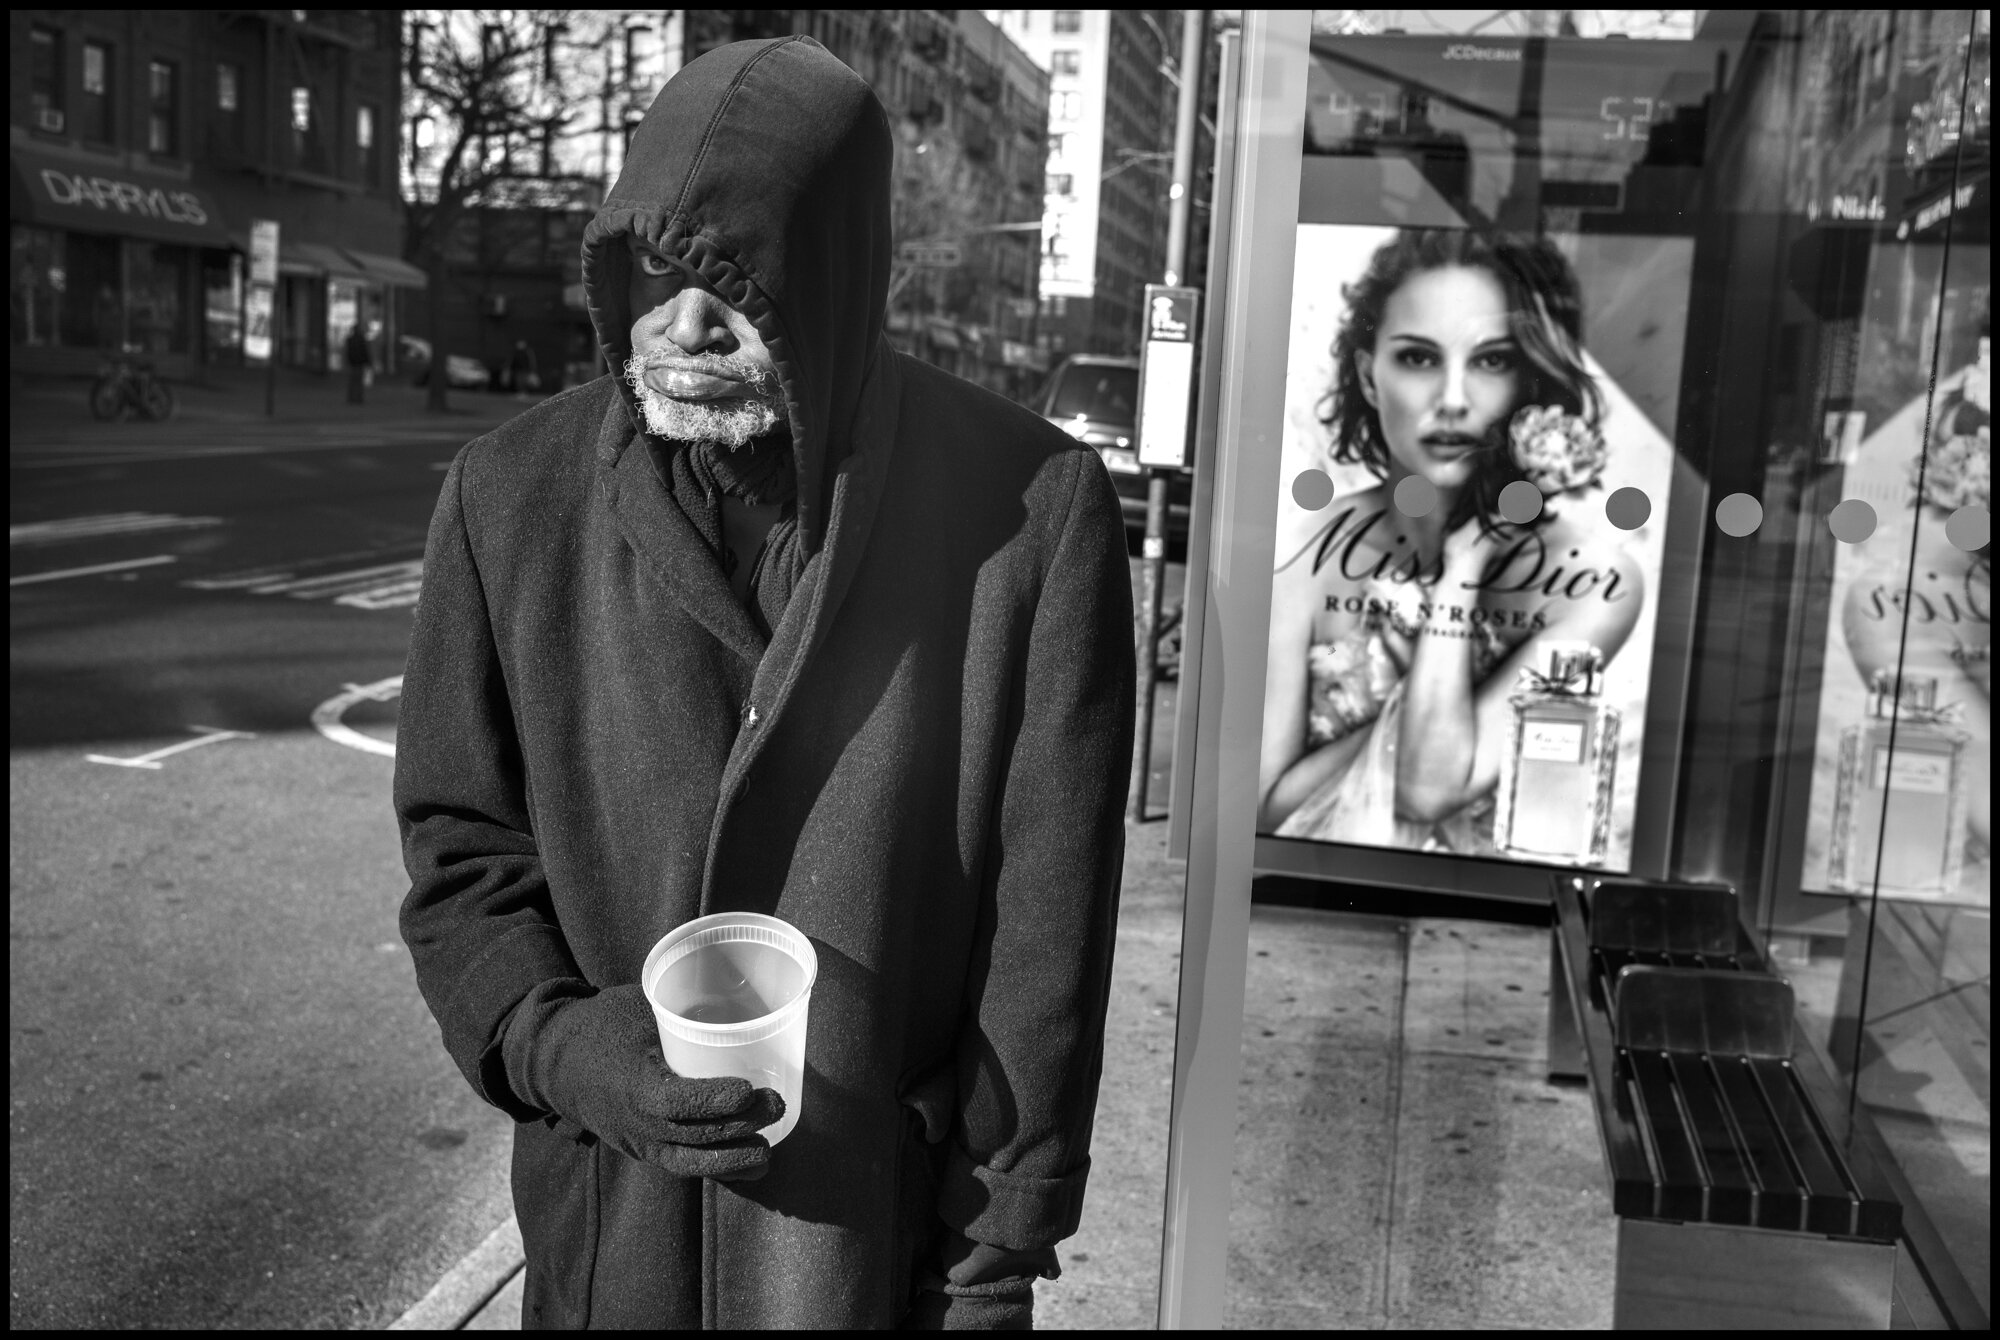  Clifford Jordan, 61, stands at bus stop on Amsterdam near where he lives. He told me he was out because he needs money to eat.  March 24, 2020. © Peter Turnley.  ID# 03-002 